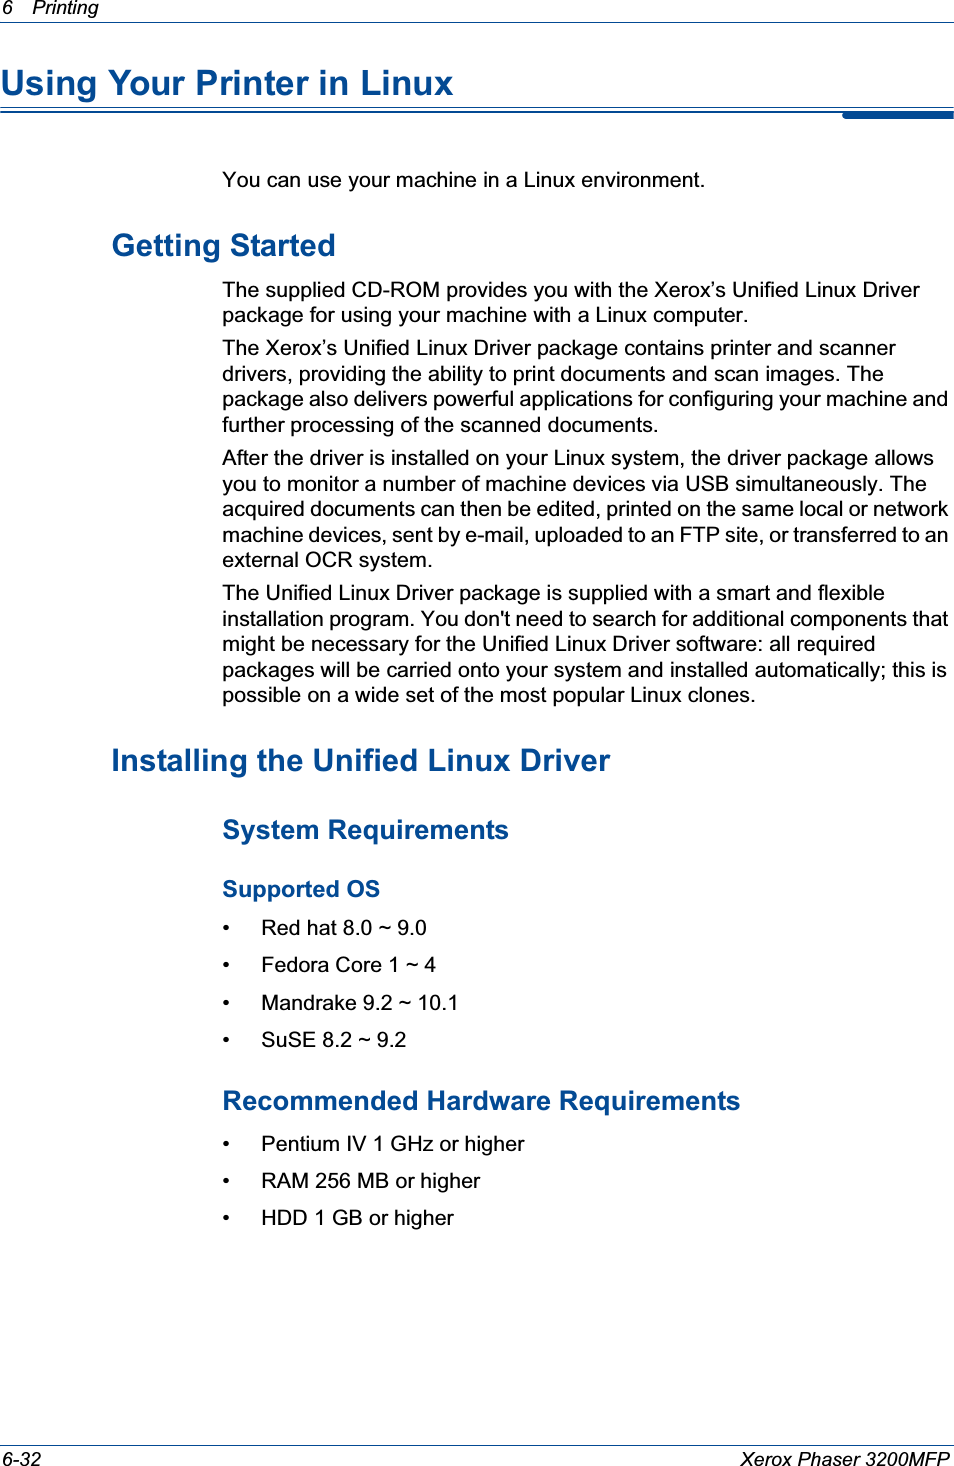 6Printing 6-32 Xerox Phaser 3200MFPUsing Your Printer in Linux You can use your machine in a Linux environment. Getting StartedThe supplied CD-ROM provides you with the Xerox’s Unified Linux Driver package for using your machine with a Linux computer.The Xerox’s Unified Linux Driver package contains printer and scanner drivers, providing the ability to print documents and scan images. The package also delivers powerful applications for configuring your machine and further processing of the scanned documents.After the driver is installed on your Linux system, the driver package allows you to monitor a number of machine devices via USB simultaneously. The acquired documents can then be edited, printed on the same local or network machine devices, sent by e-mail, uploaded to an FTP site, or transferred to an external OCR system.The Unified Linux Driver package is supplied with a smart and flexible installation program. You don&apos;t need to search for additional components that might be necessary for the Unified Linux Driver software: all required packages will be carried onto your system and installed automatically; this is possible on a wide set of the most popular Linux clones.Installing the Unified Linux DriverSystem Requirements Supported OS• Red hat 8.0 ~ 9.0• Fedora Core 1 ~ 4• Mandrake 9.2 ~ 10.1• SuSE 8.2 ~ 9.2Recommended Hardware Requirements• Pentium IV 1 GHz or higher• RAM 256 MB or higher• HDD 1 GB or higher